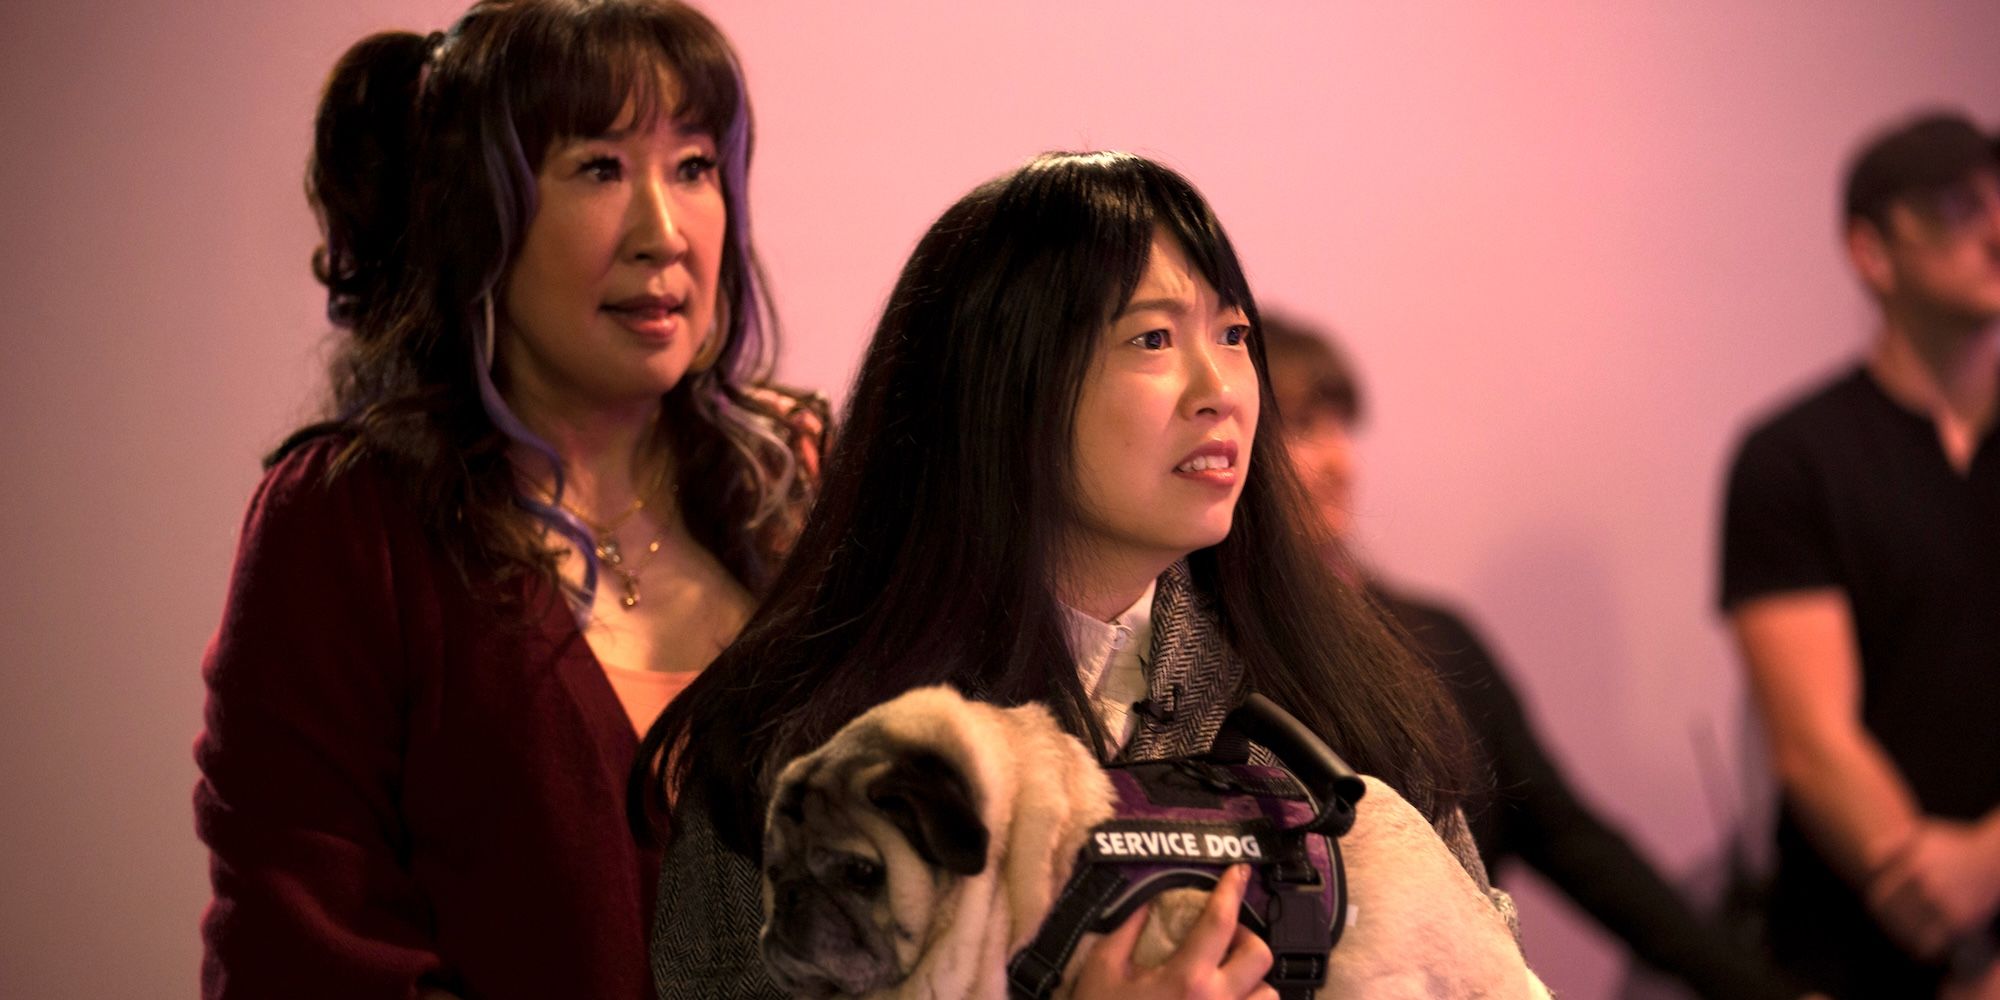 Sandra Oh & Awkwafina Have Nice Chemistry In Energetic Comedy